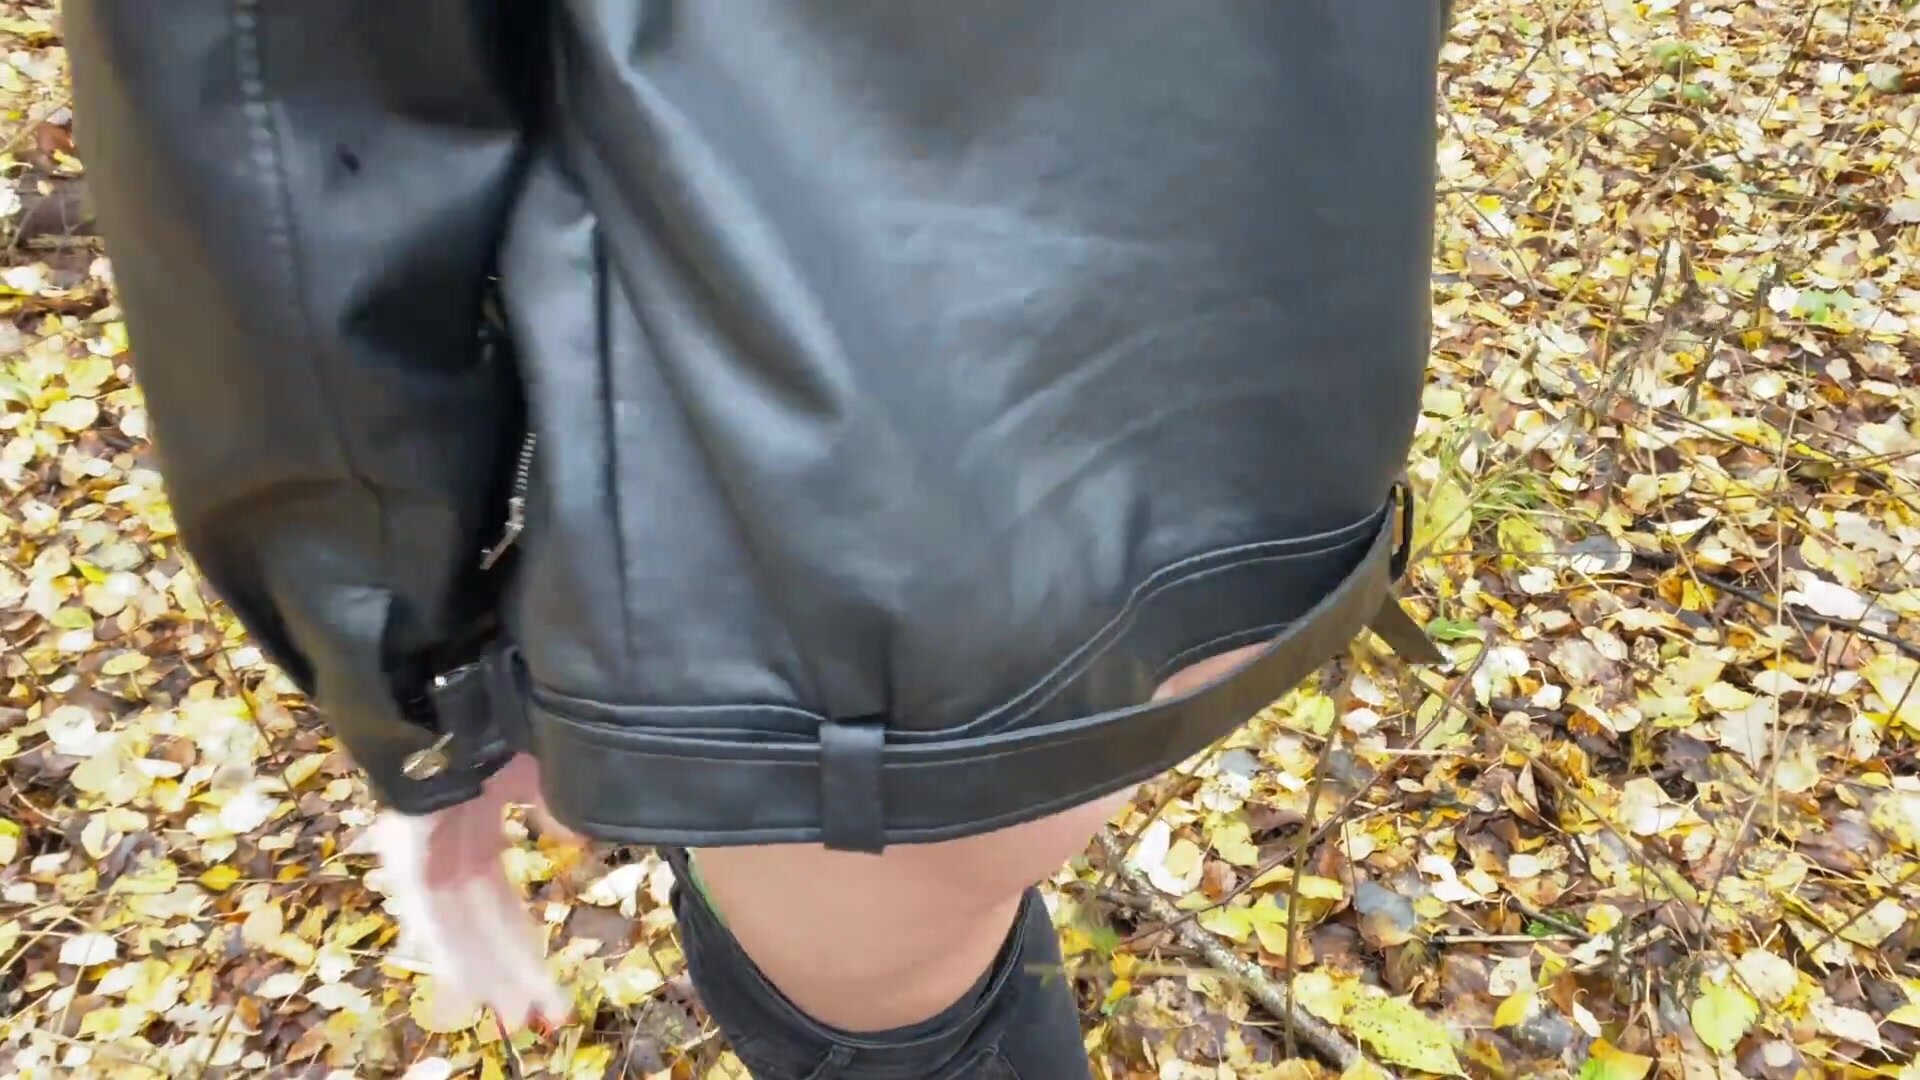 MrSmithMsSmith - Outdoor Sex With Girl in Leather Jacket